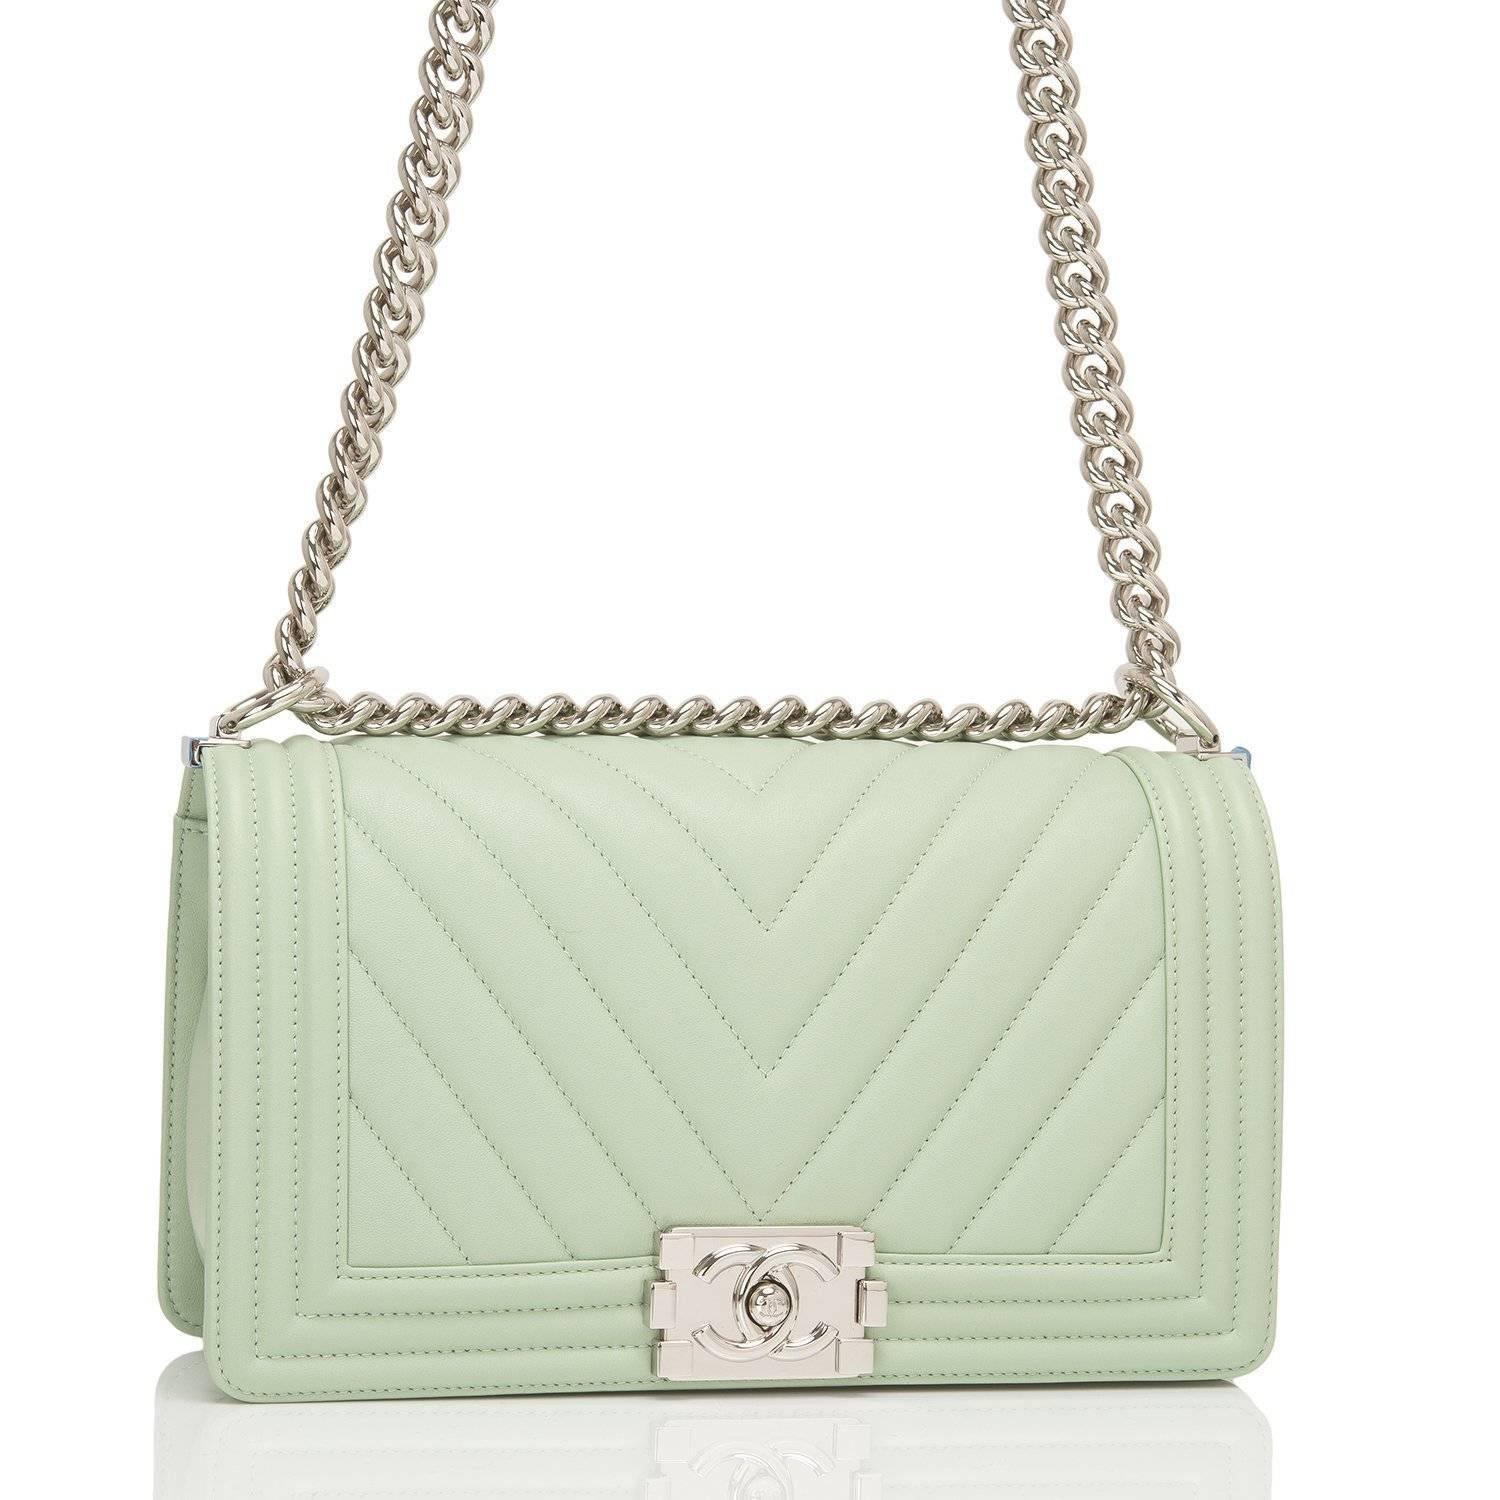 Chanel chevron quilted Medium Boy bag of light green calfskin leather with silver tone hardware.

This bag features a full front flap with the Le Boy CC push lock closure and a silver tone chain link and light green leather padded shoulder/crossbody